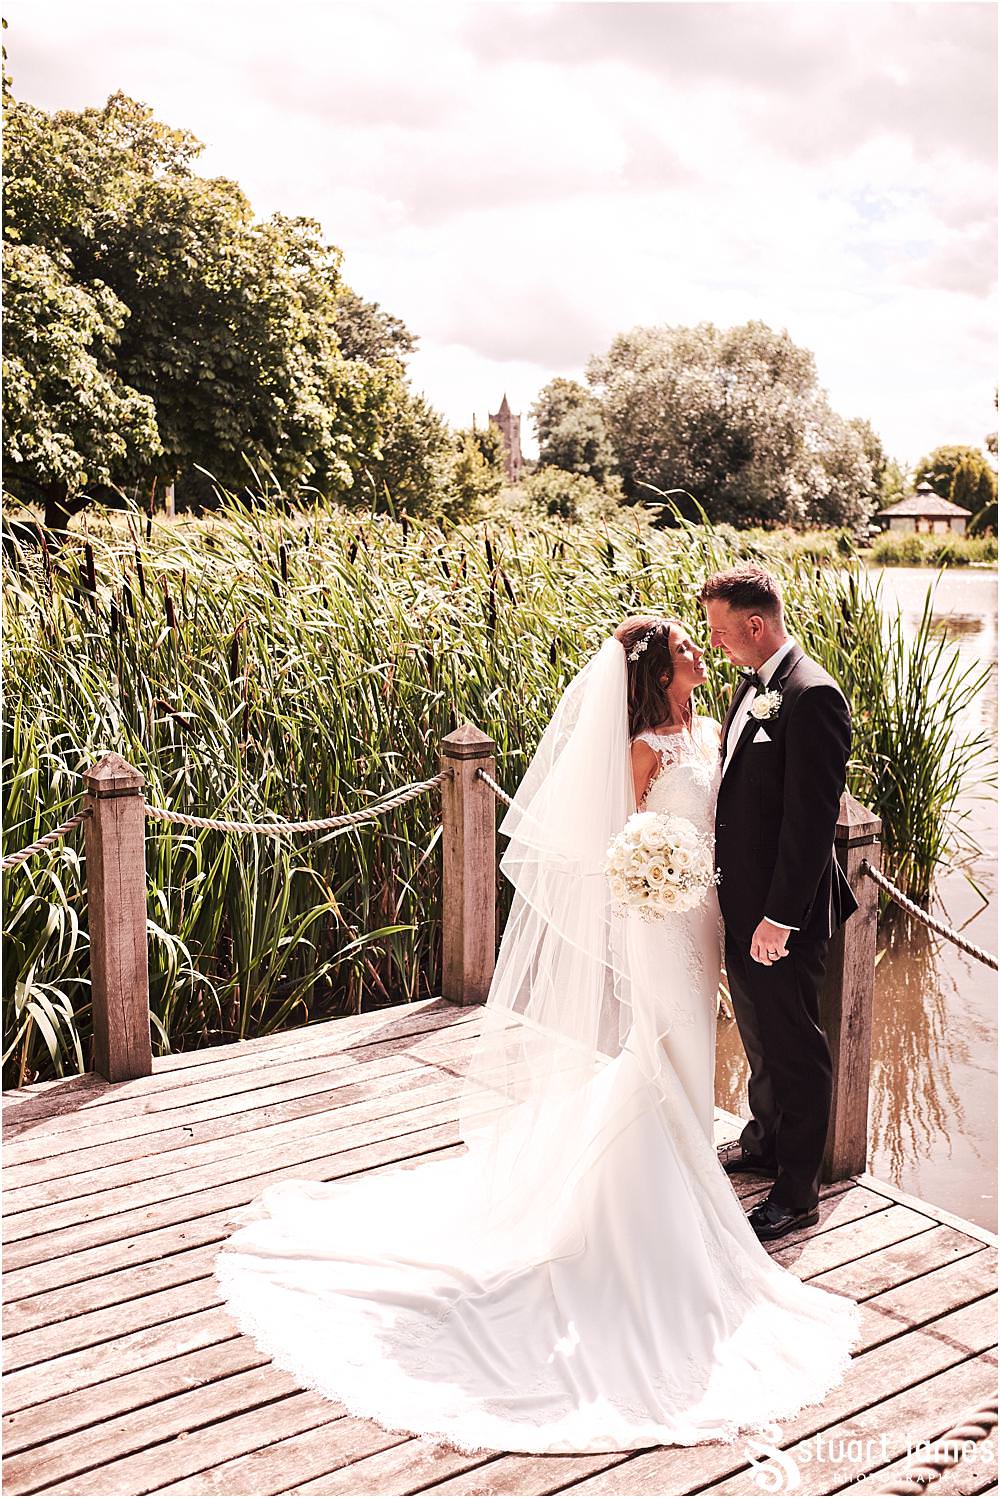 Creative relaxed portraits on the lakeside with the bride and groom at The Moat House in Acton Trussell by Documentary Wedding Photographer Stuart James